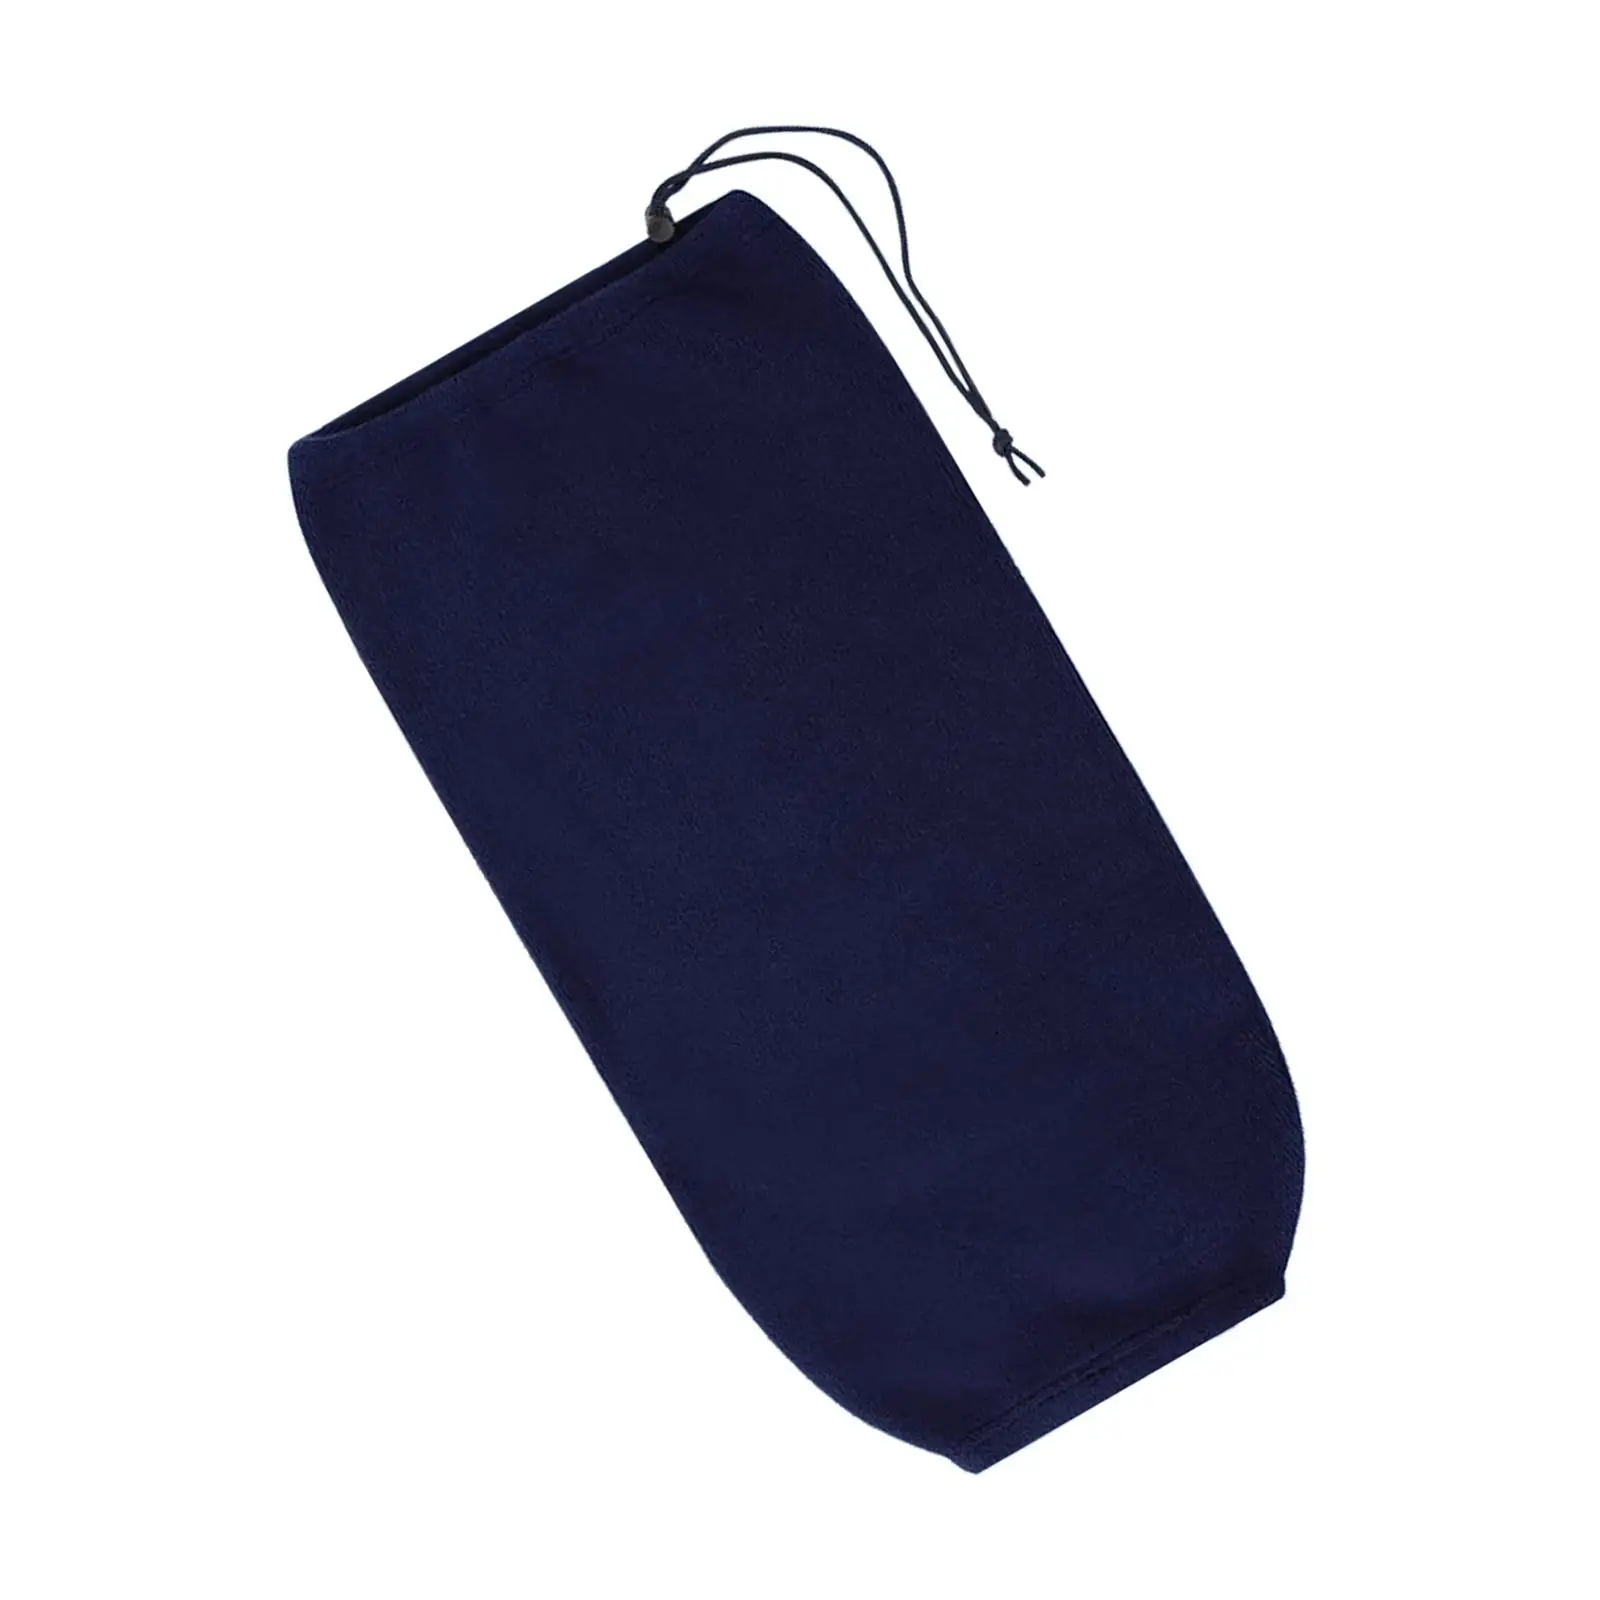 Boat Cover Easy to Use Protective Sleeve for Marine Boat Yachts